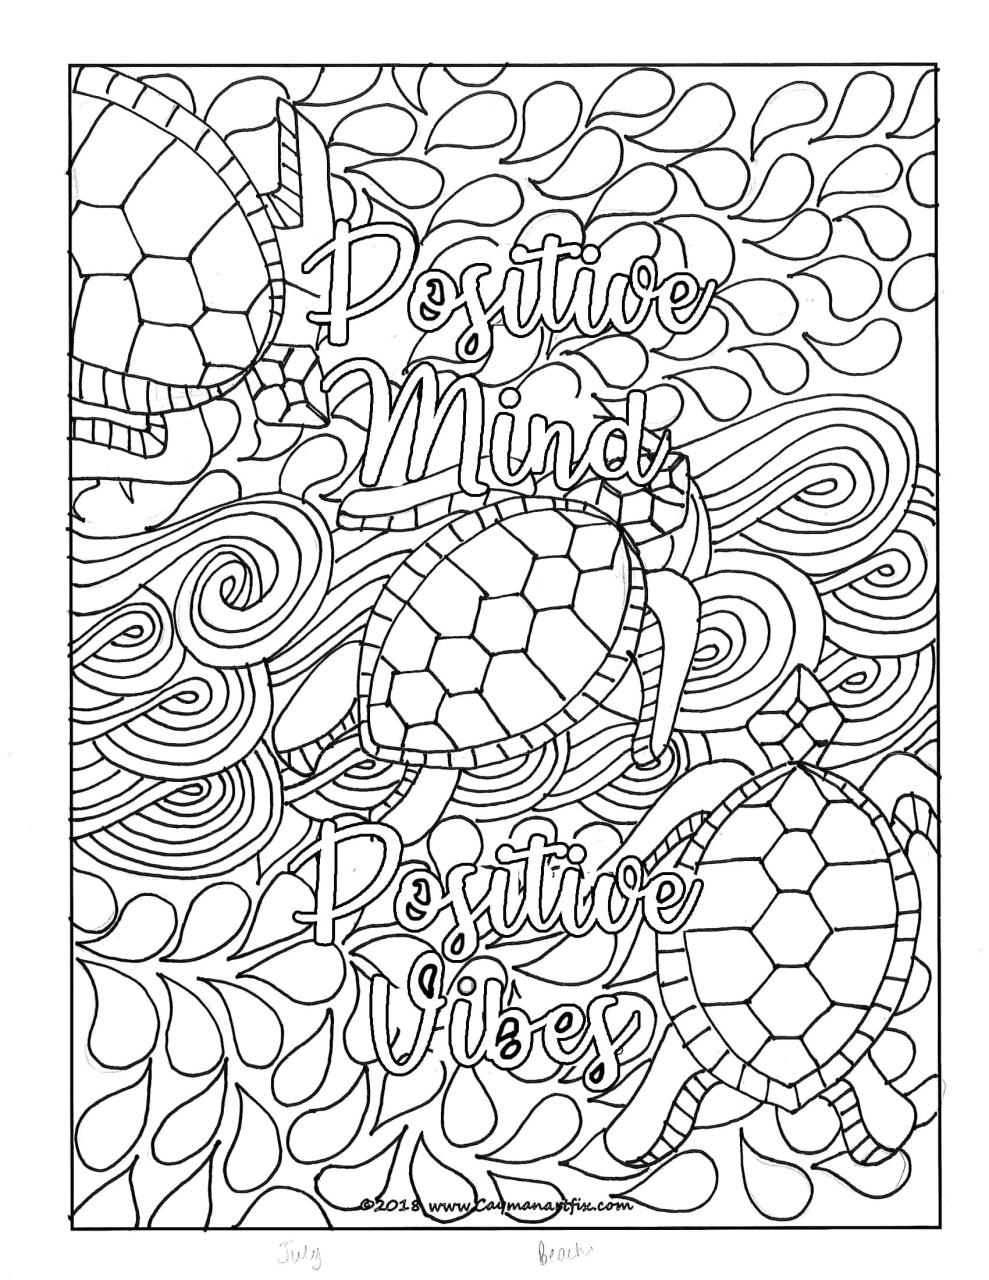 Goddess Coloring Pages